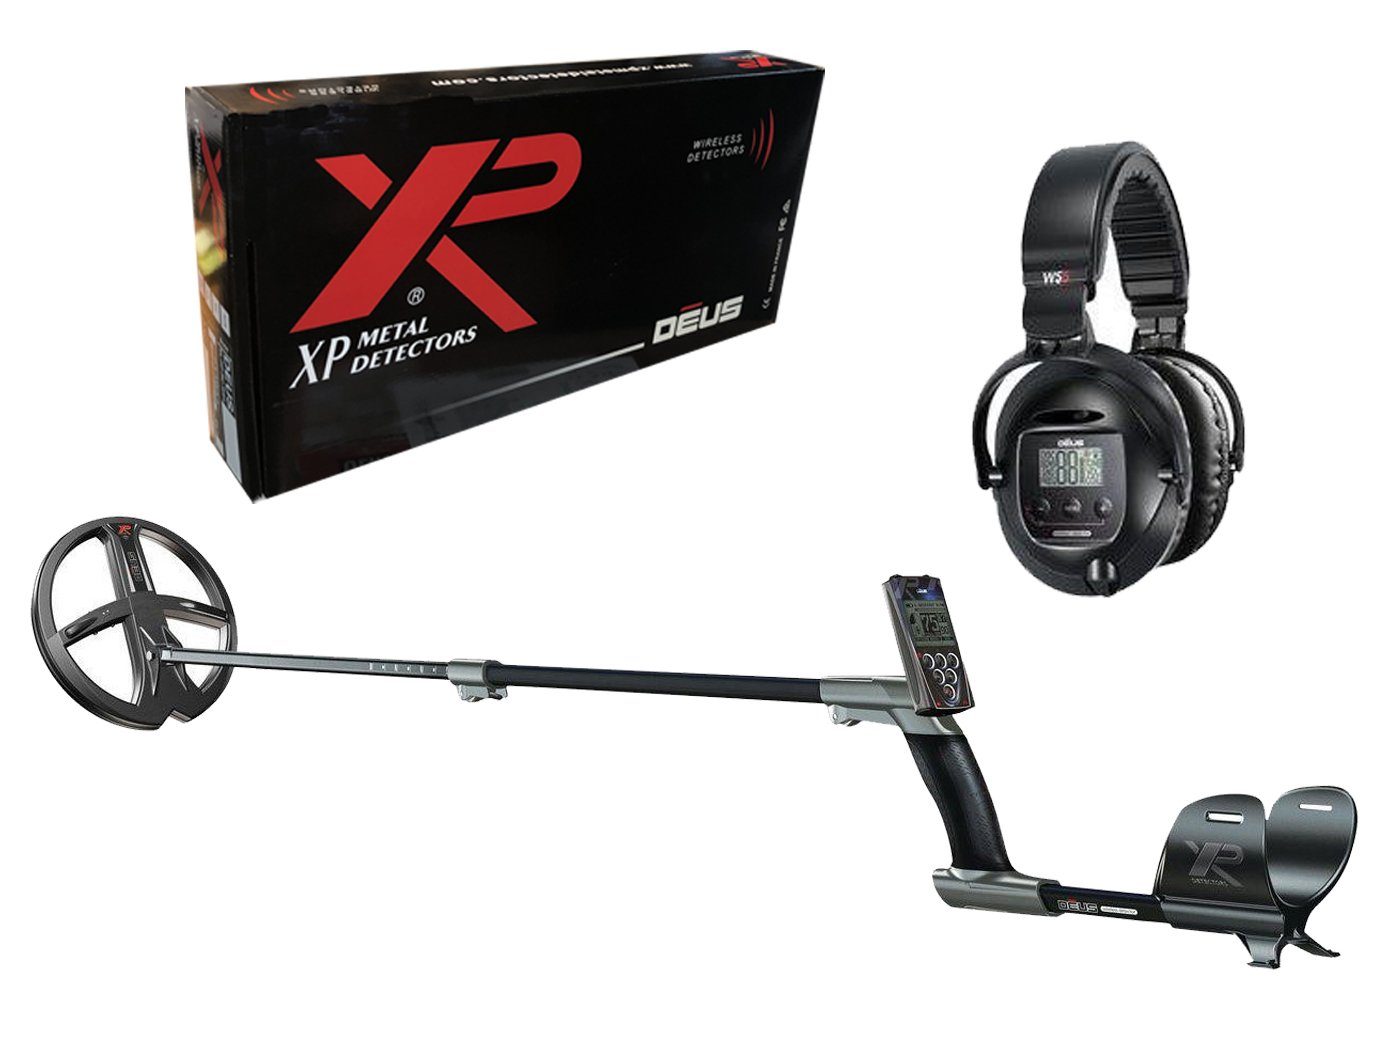 XP DEUS Detector with 11" X35 coil, LCD Remote Control, and WS5 Headphones